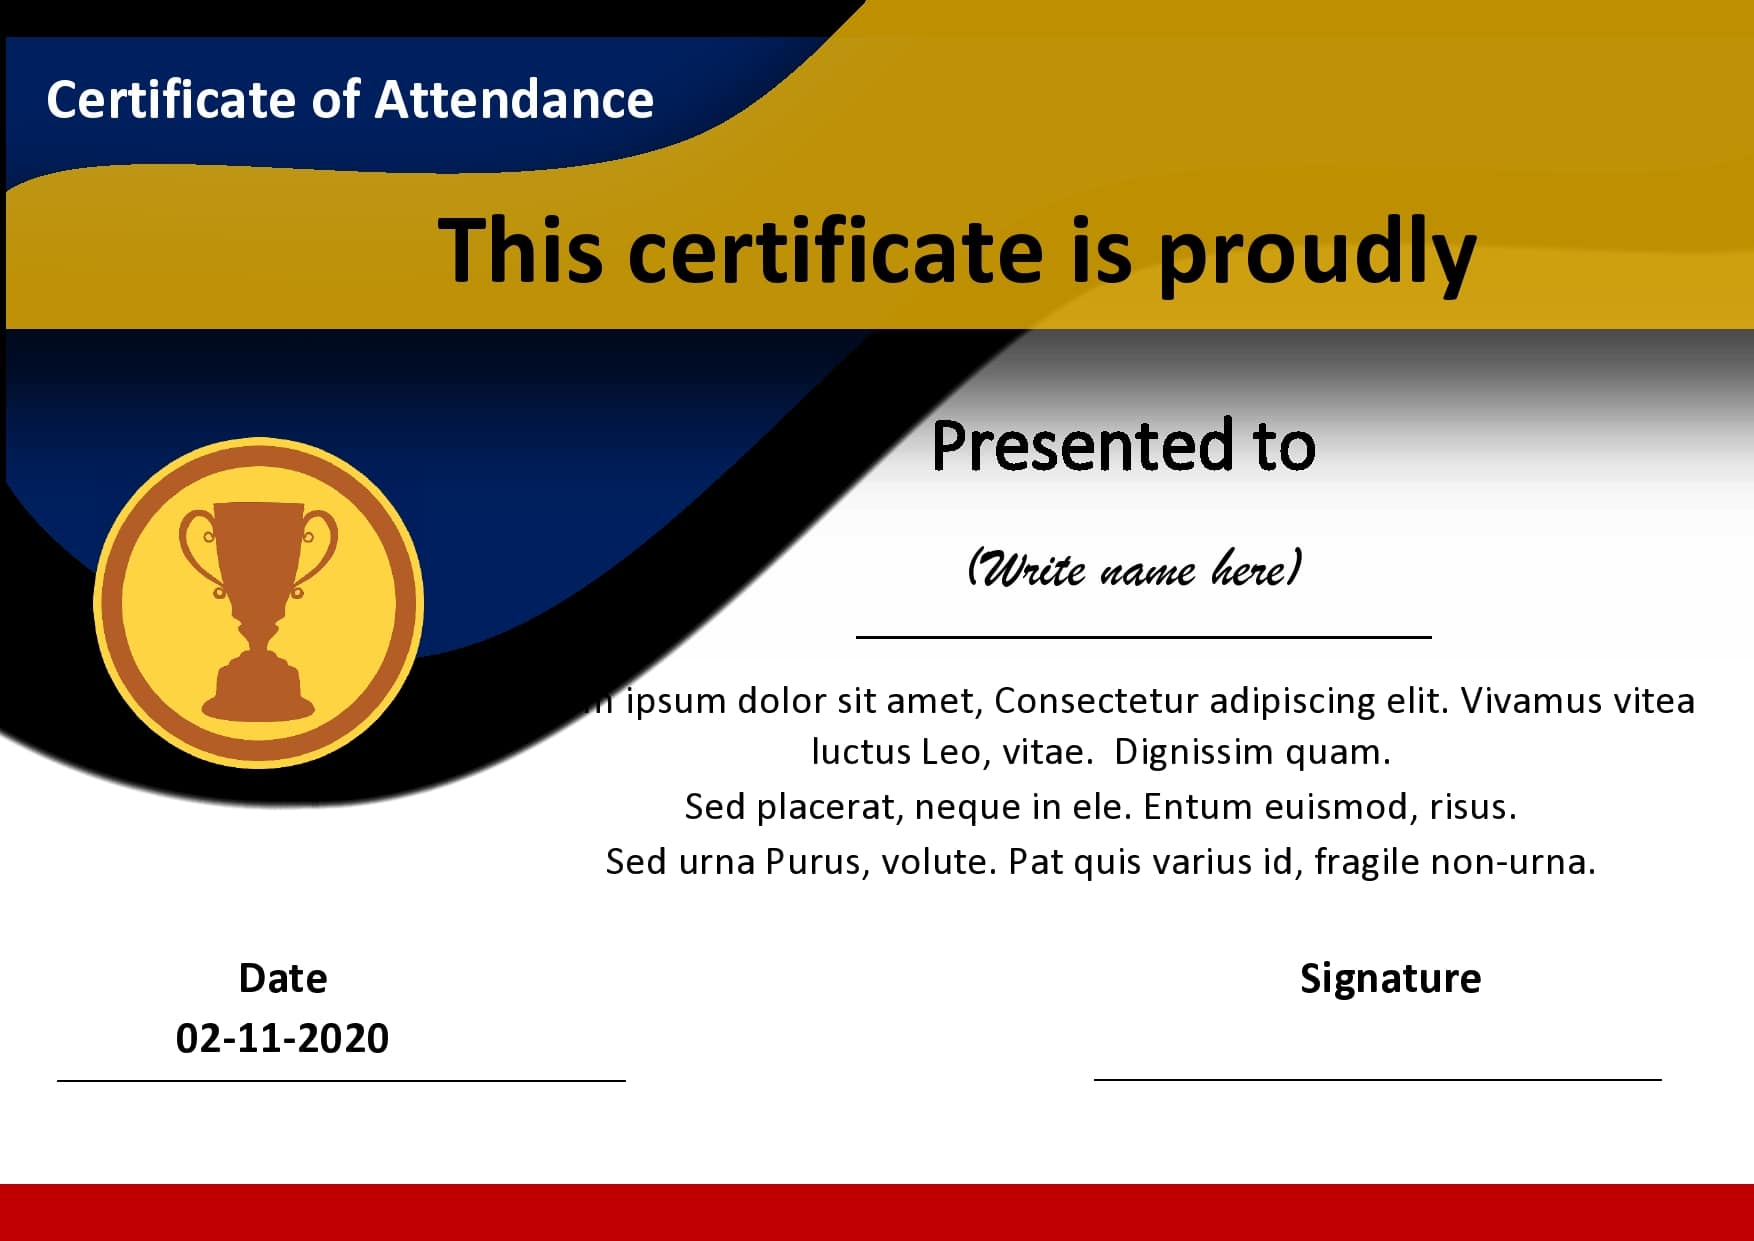 10 Free Certificates Of Attendance Templates (Word) Within Certificate Of Attendance Conference Template